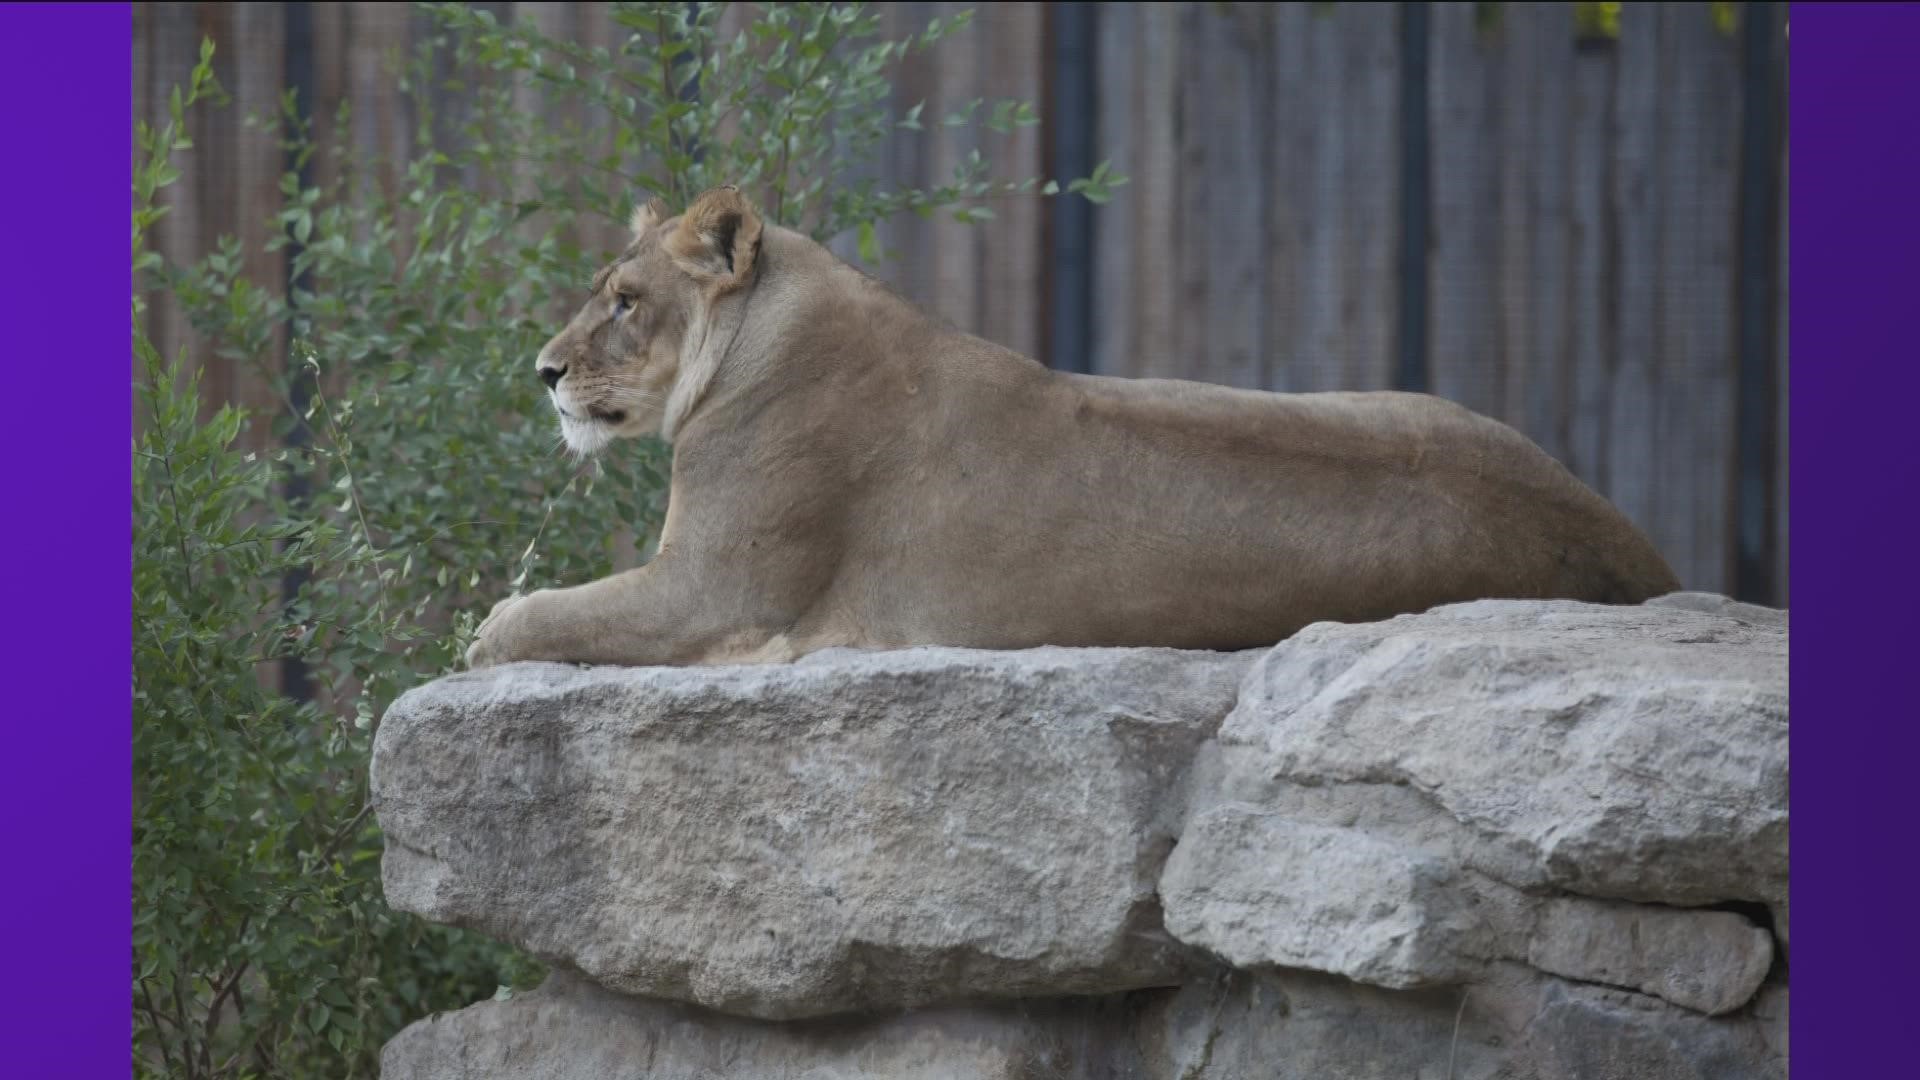 The 22-year-old female lion, named Mudiwa, first joined Zoo Boise back in 2008.